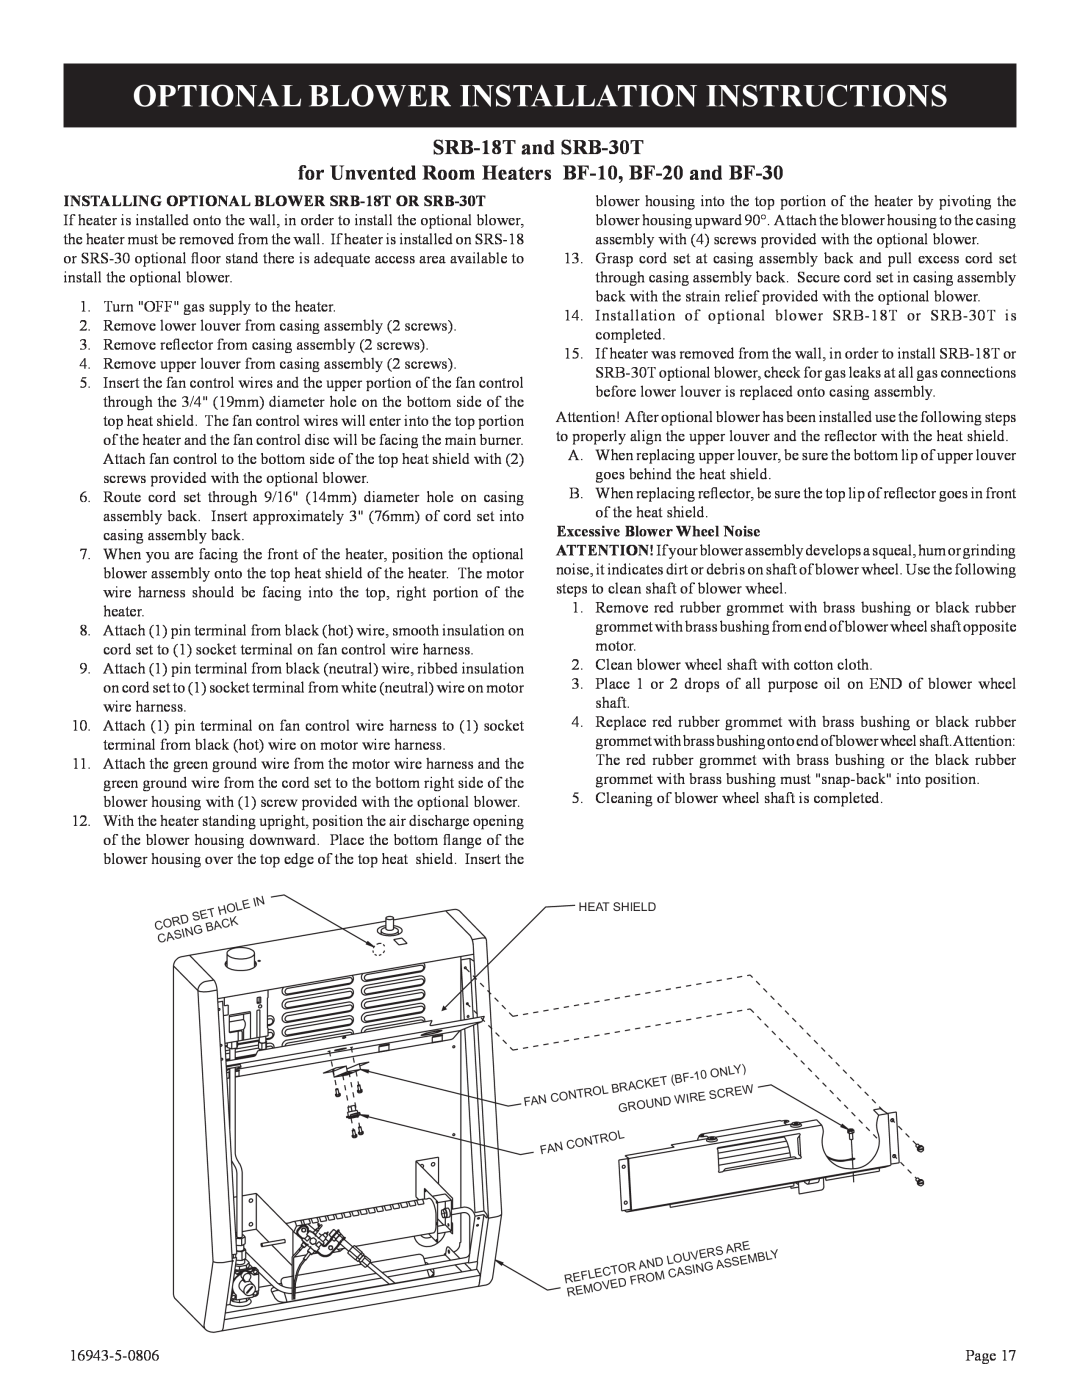 Empire Comfort Systems BF-10-2 Optional Blower Installation Instructions, SRB-18Tand SRB-30T, Excessive Blower Wheel Noise 